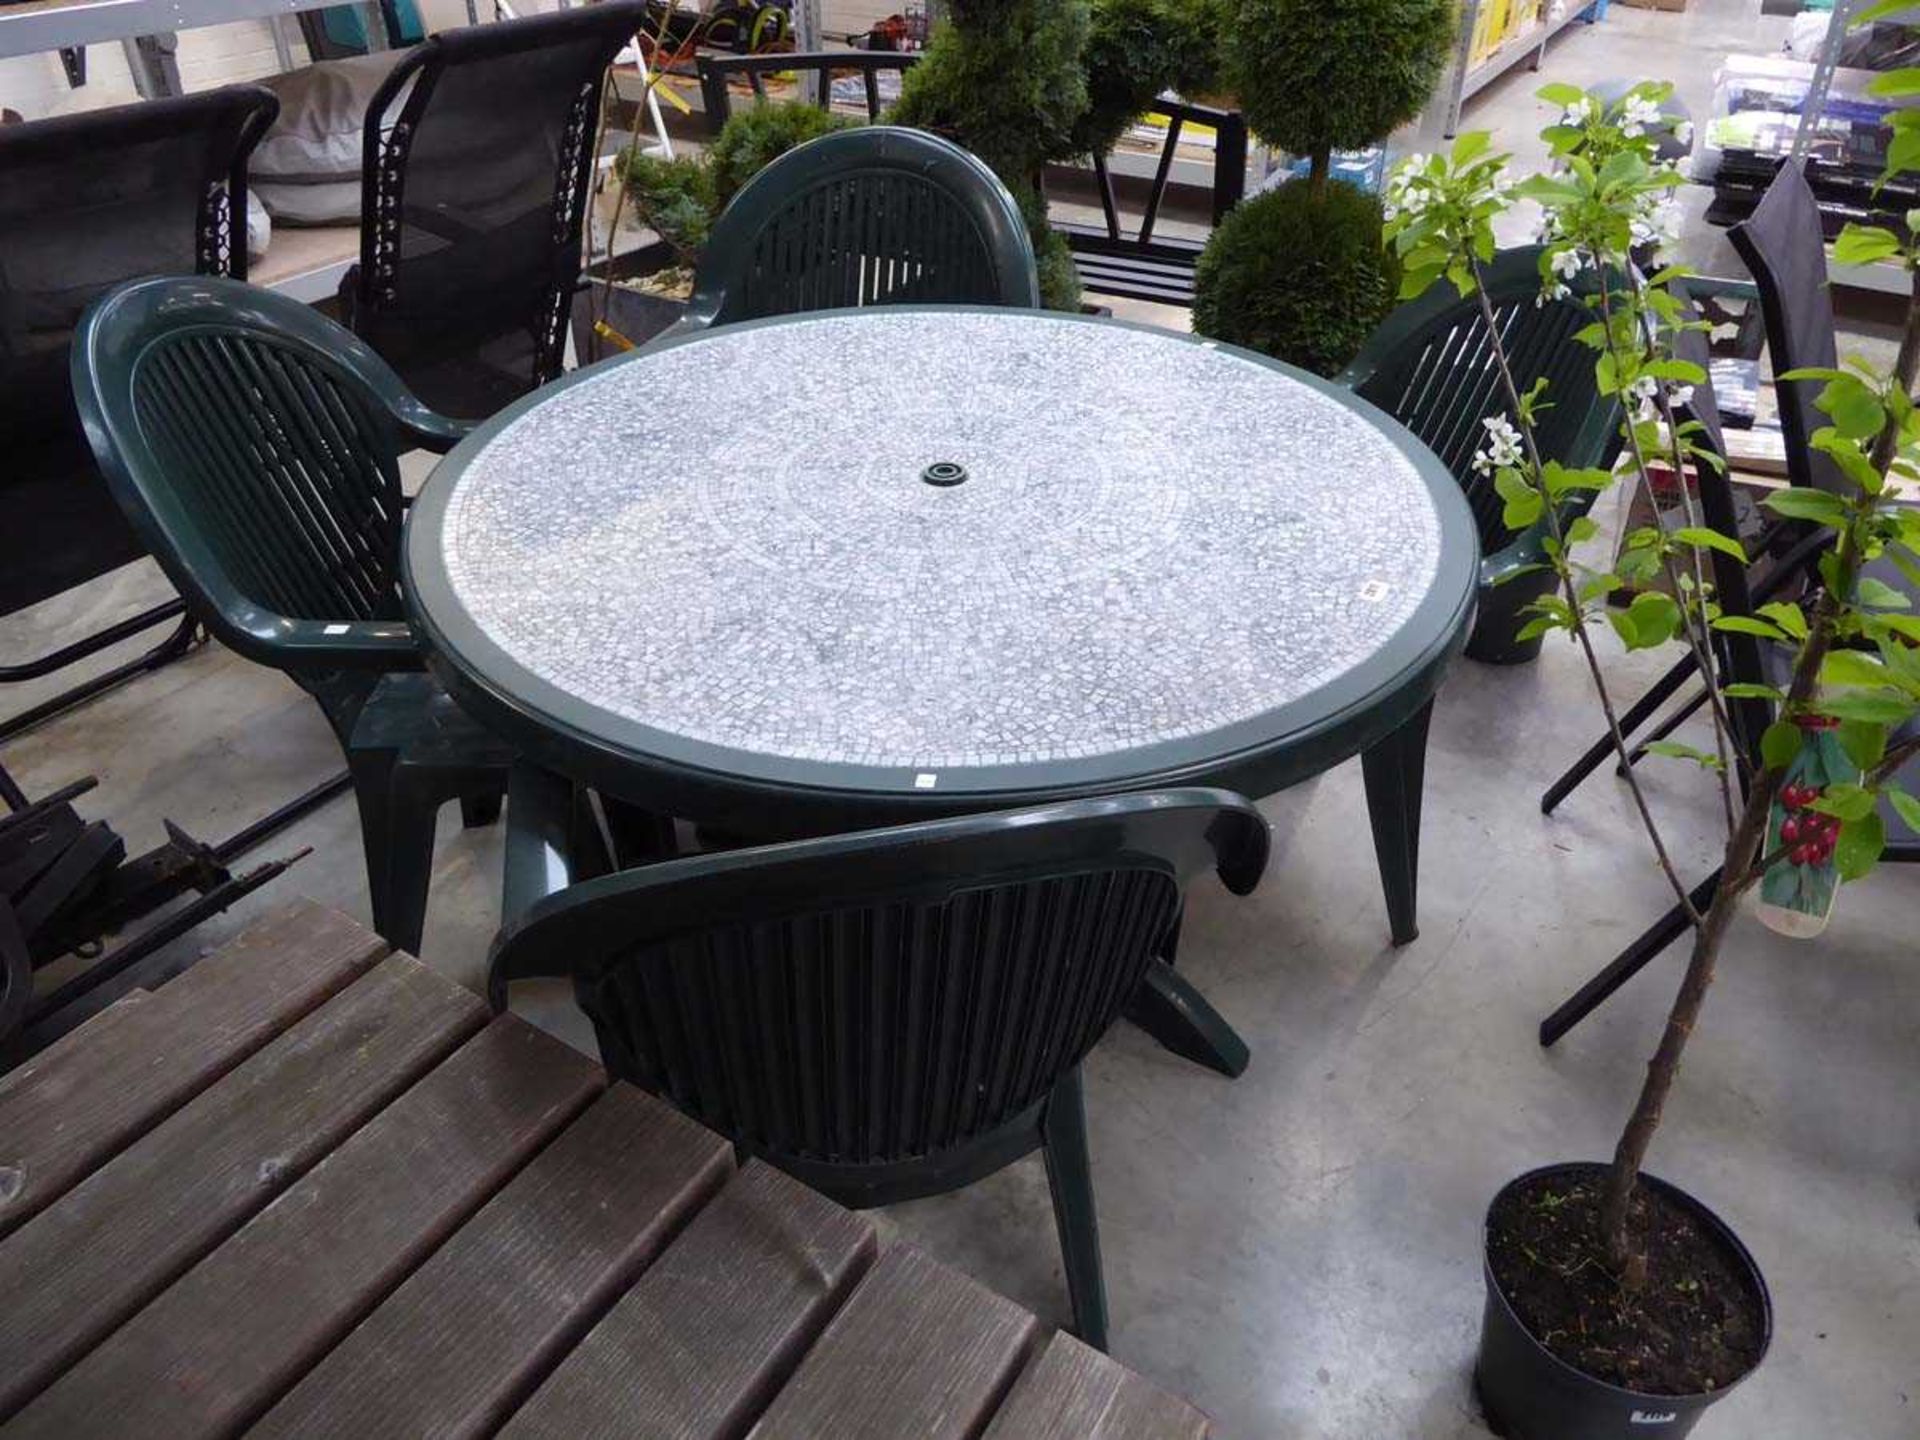 Green plastic circular garden table with mosaic effect surface and 4 matching chairs